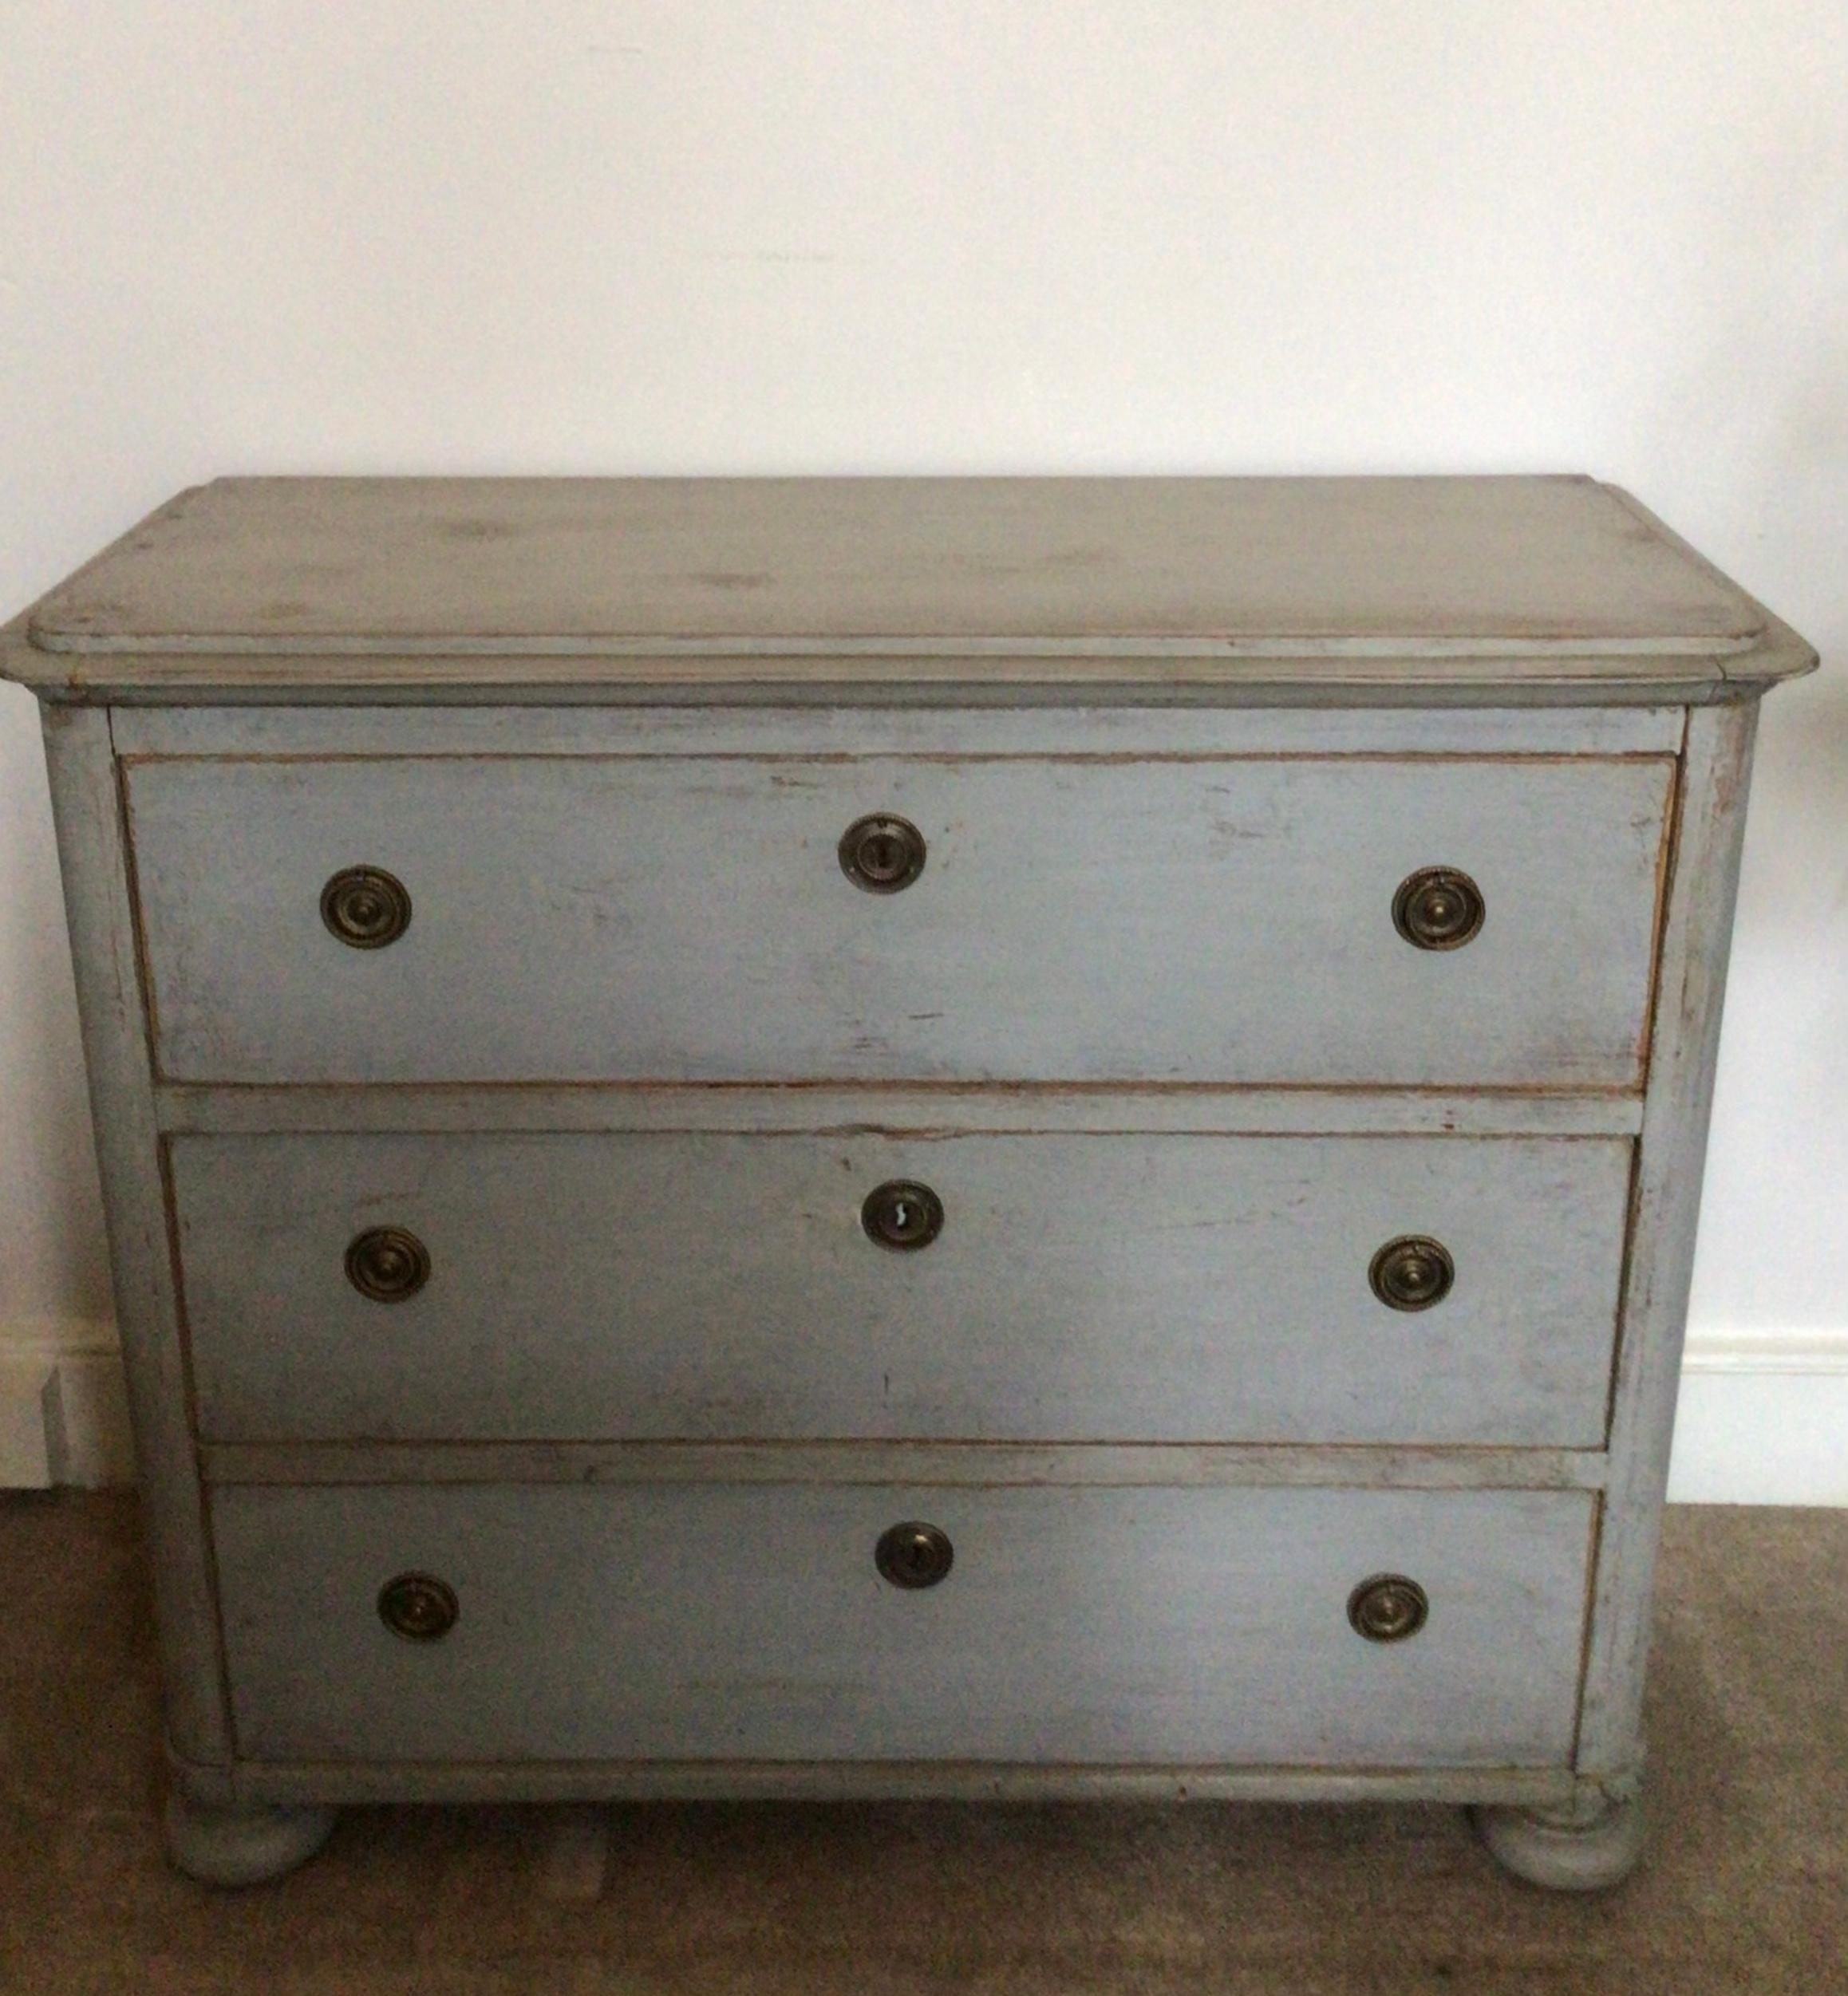 circa 1890s Swedish three drawer painted commode or chest of drawers which was most likely to have been adapted from a four drawer but now a more usable size as a bedside cabinet or for a smaller bedroom.
The paint is typically Scandinavian light